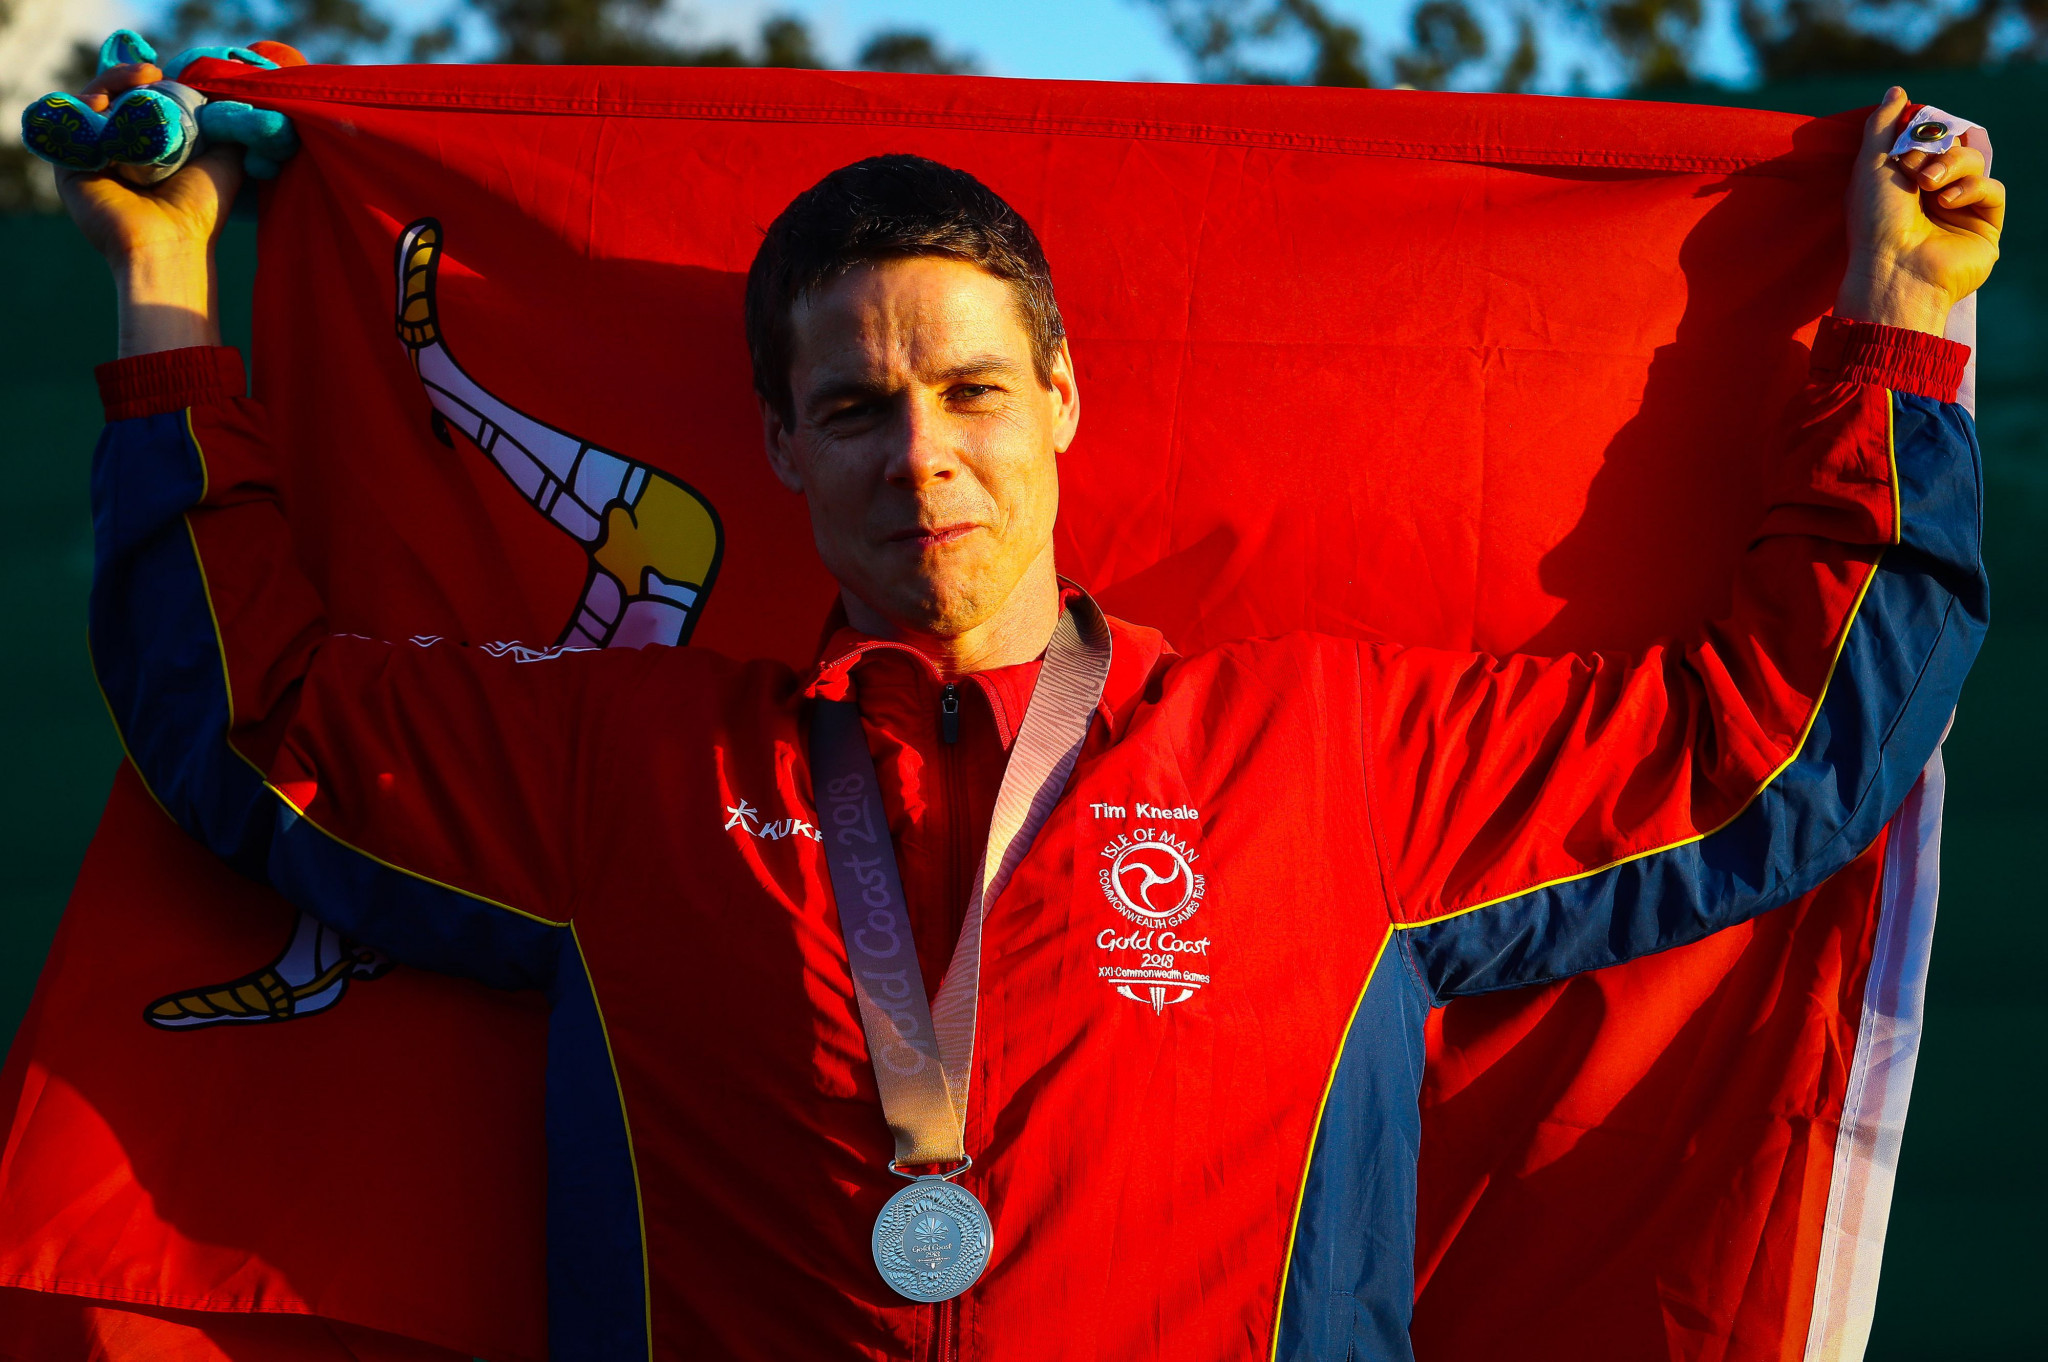 Manx shooter Tim Kneale won a silver medal at Gold Coast 2018, as well as a bronze at Delhi 2010 ©Getty Images